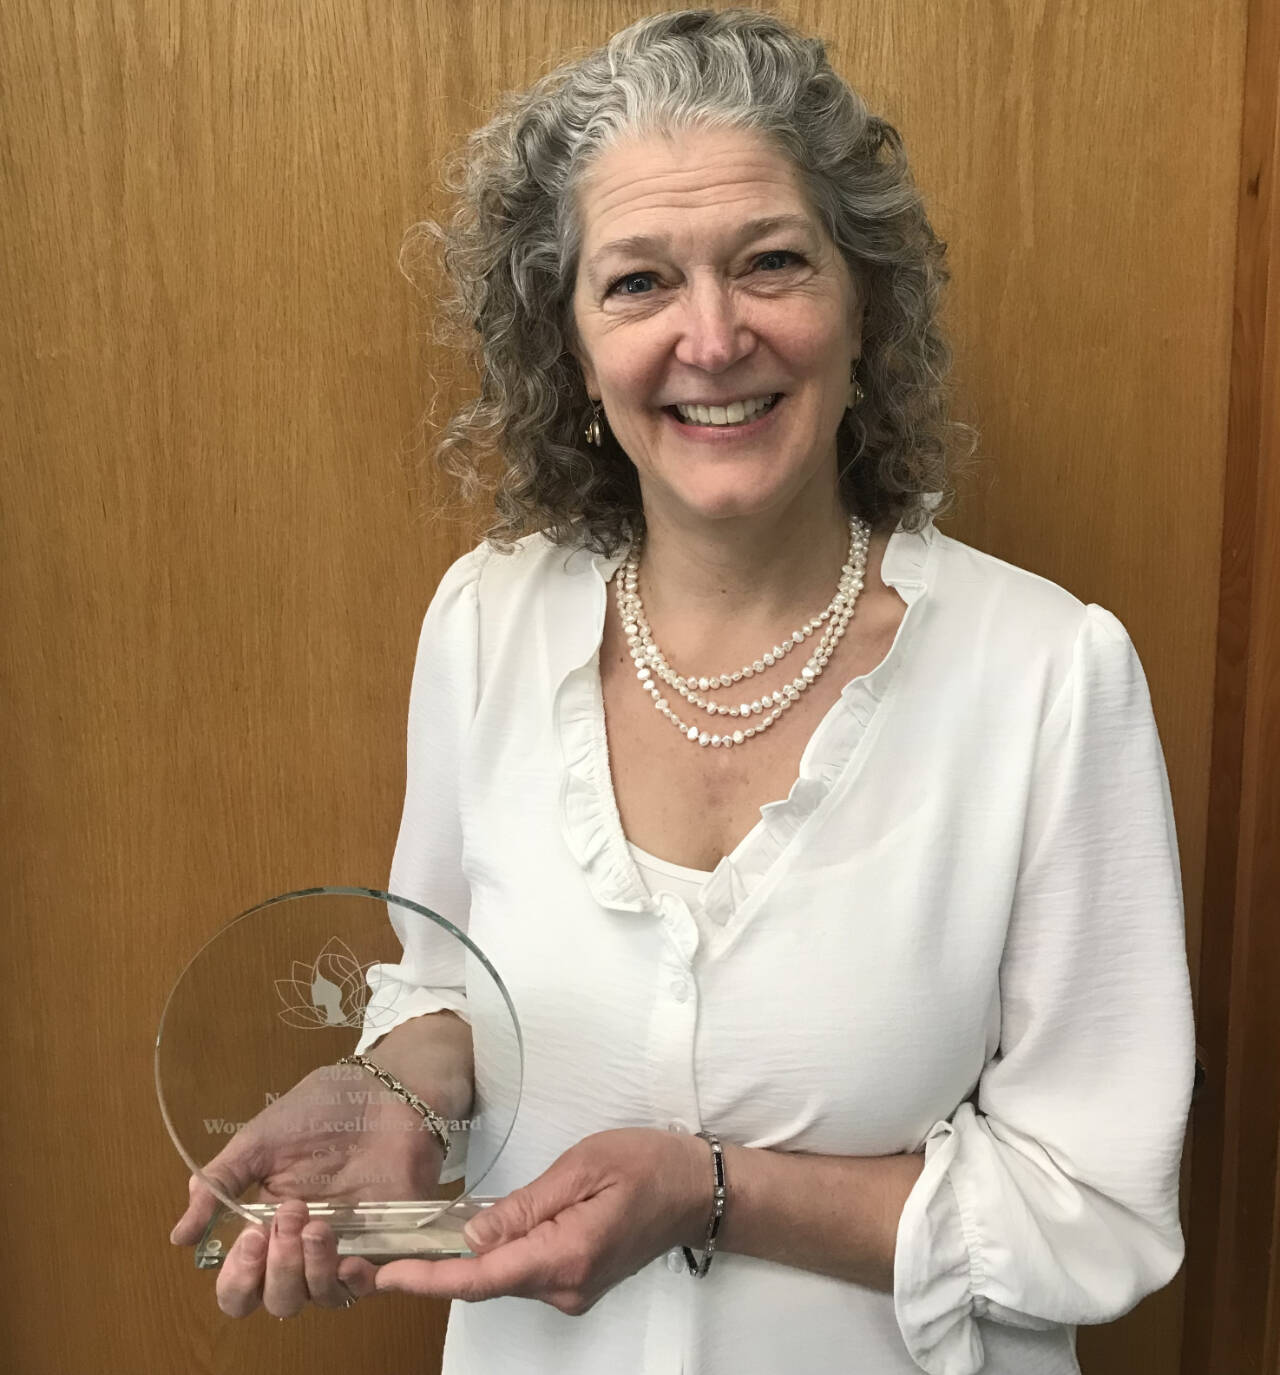 Wendy Bart, chief executive officer for Olympic Peninsula YMCA, was recently awarded the Women of Excellence Award from the Women’s Leadership Resource Network. (Photo courtesy of Olympic Peninsula YMCA)